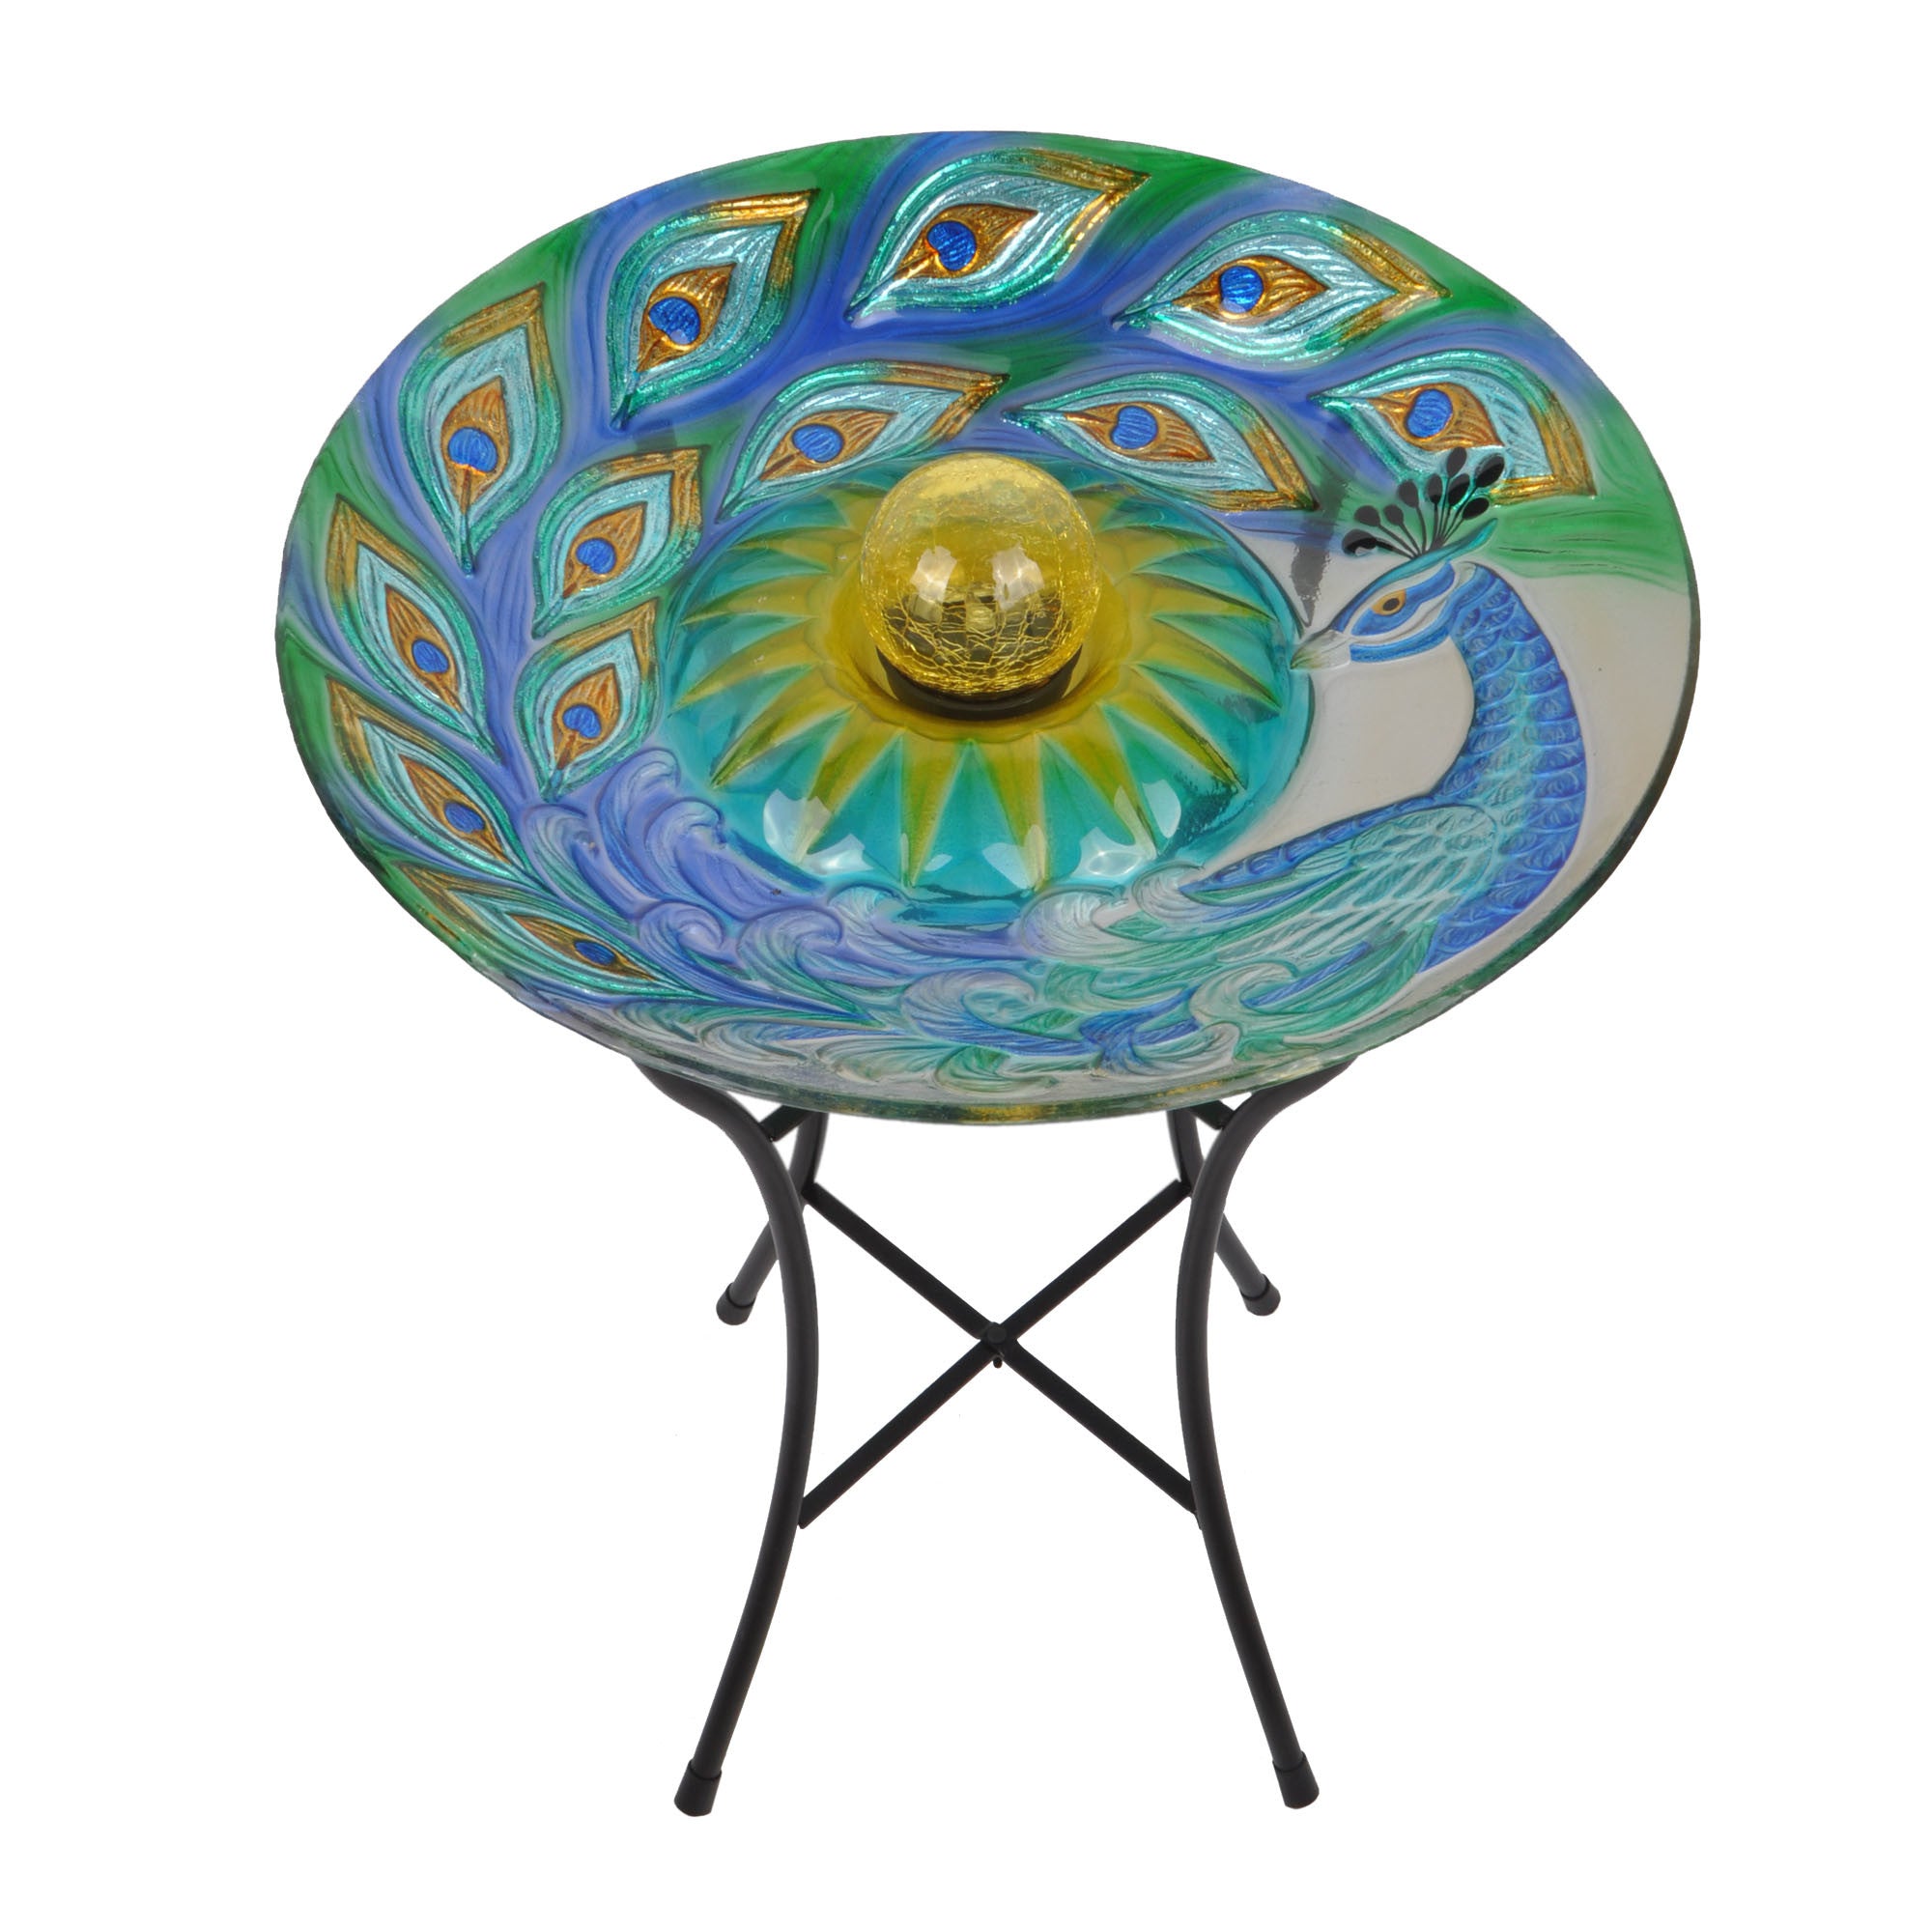 Teamson Home 18" Outdoor Solar Glass Peacock Birdbath with LED Lights and Stand, Multicolor